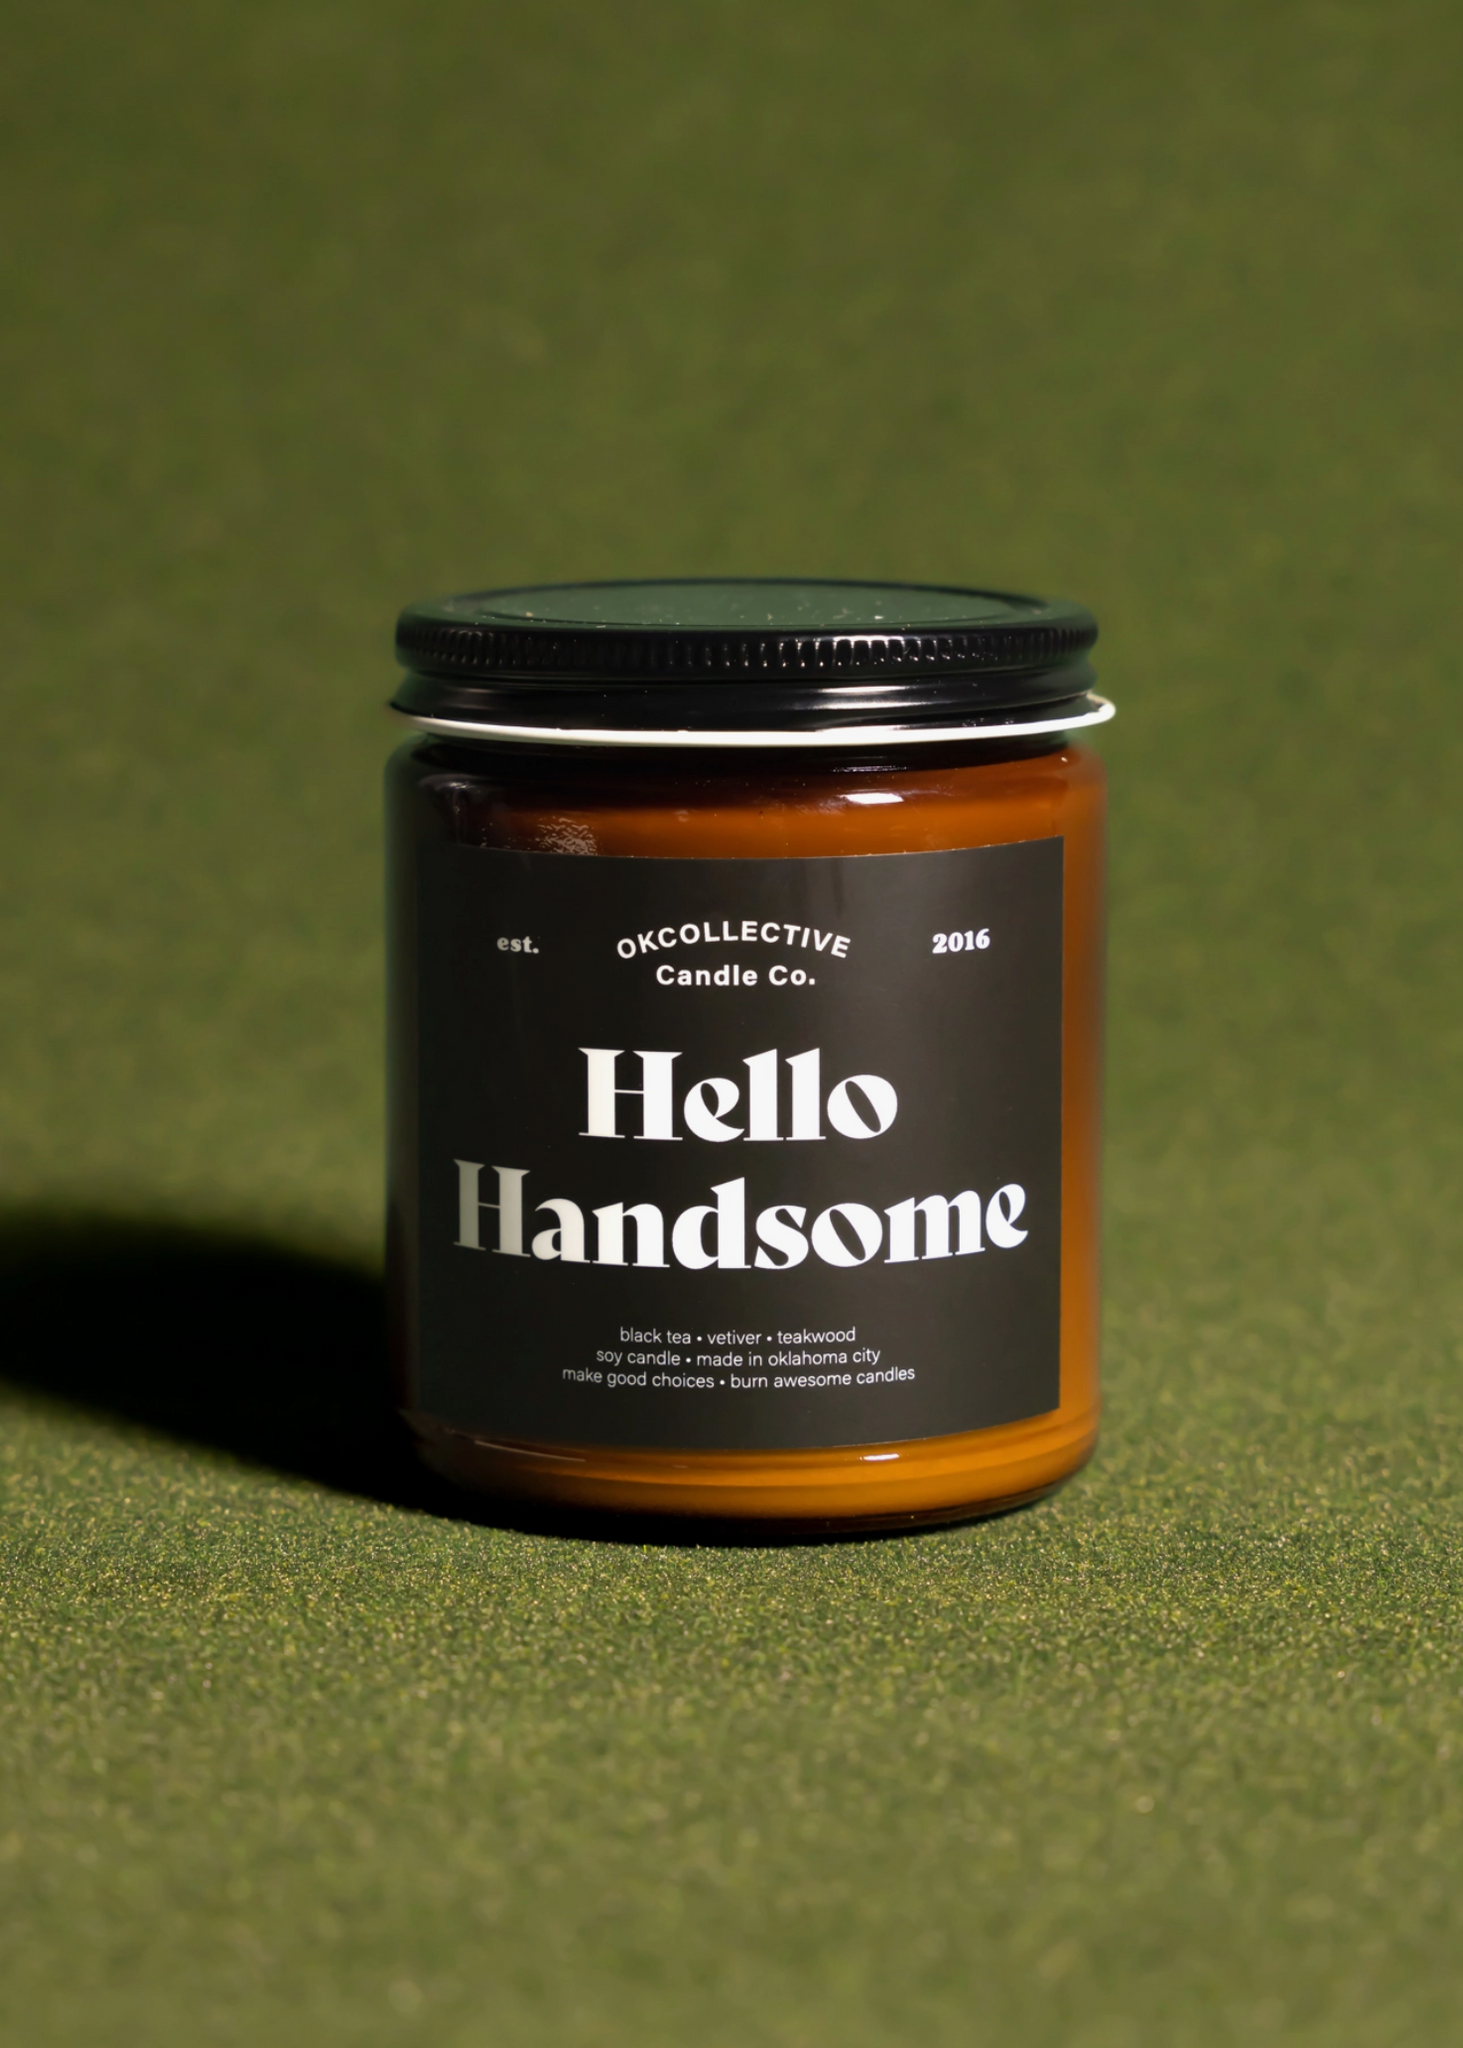 Hello Handsome Pure Soy Candle by OKCollective Sold by Le Monkey House